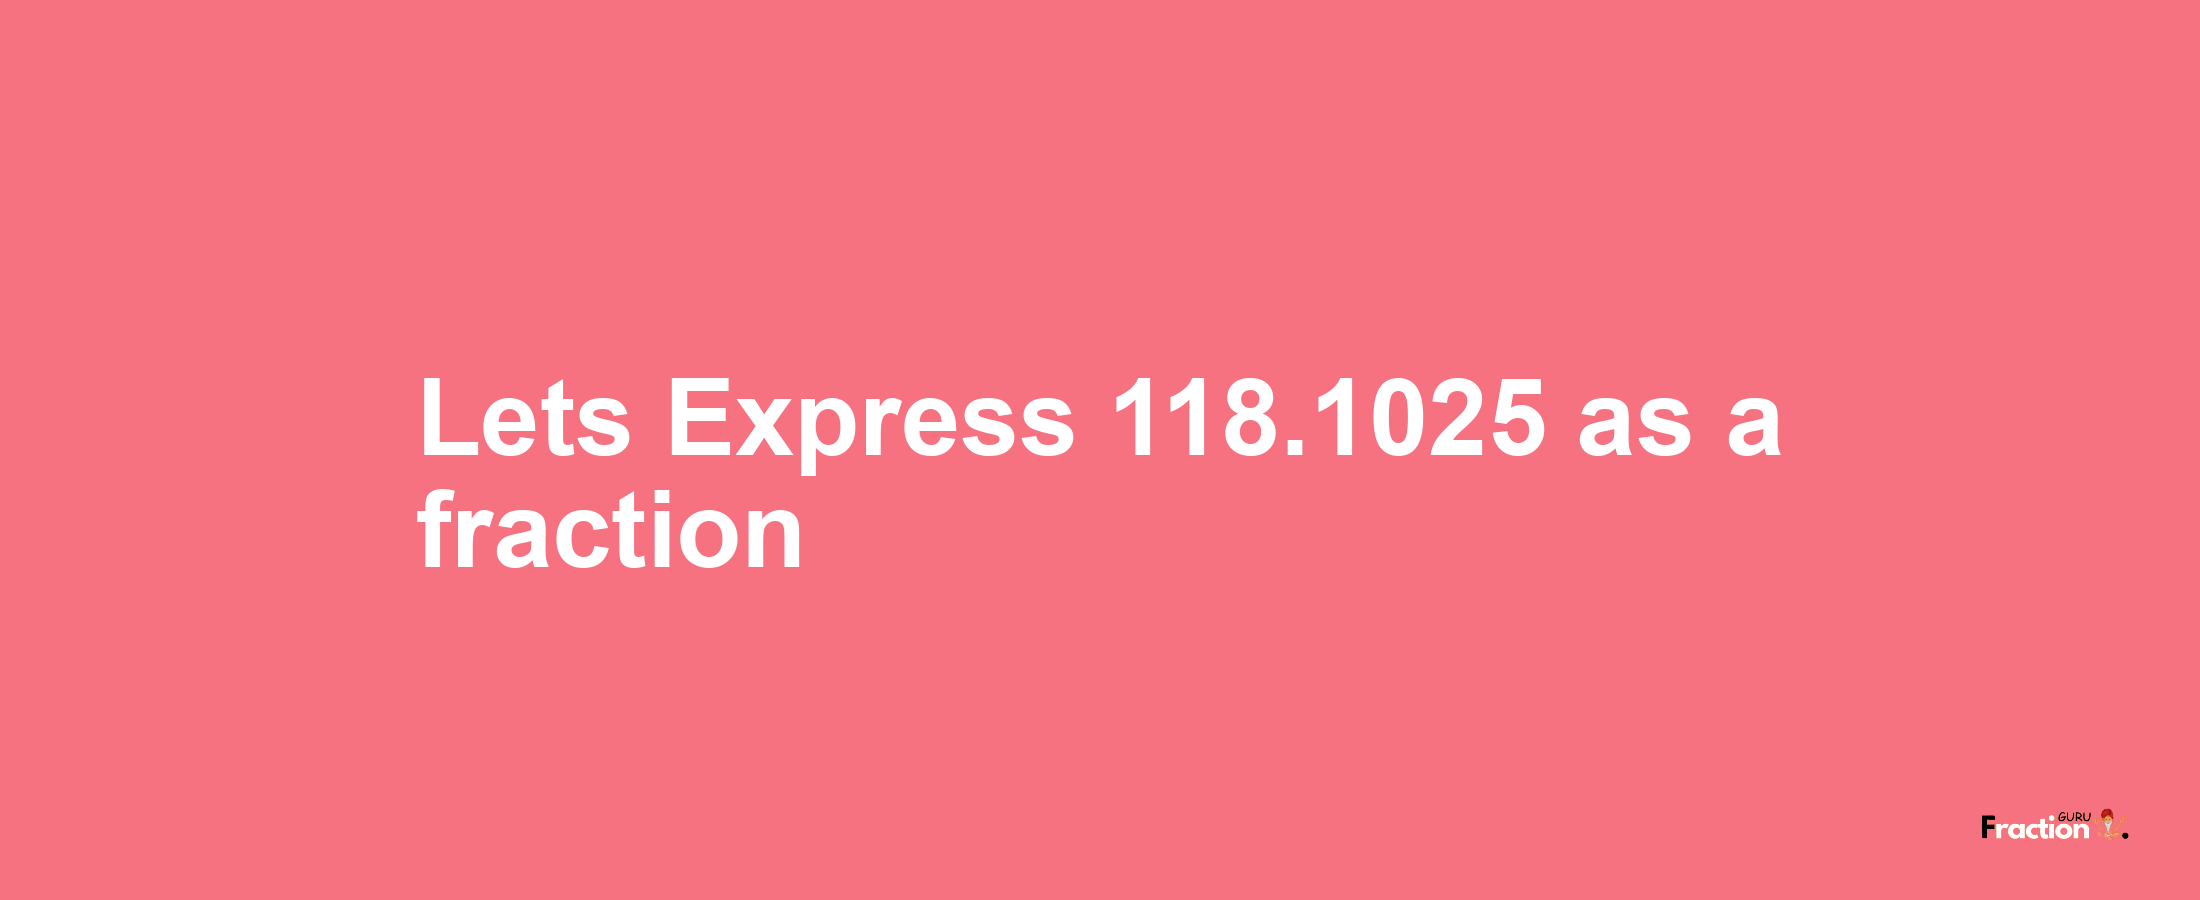 Lets Express 118.1025 as afraction